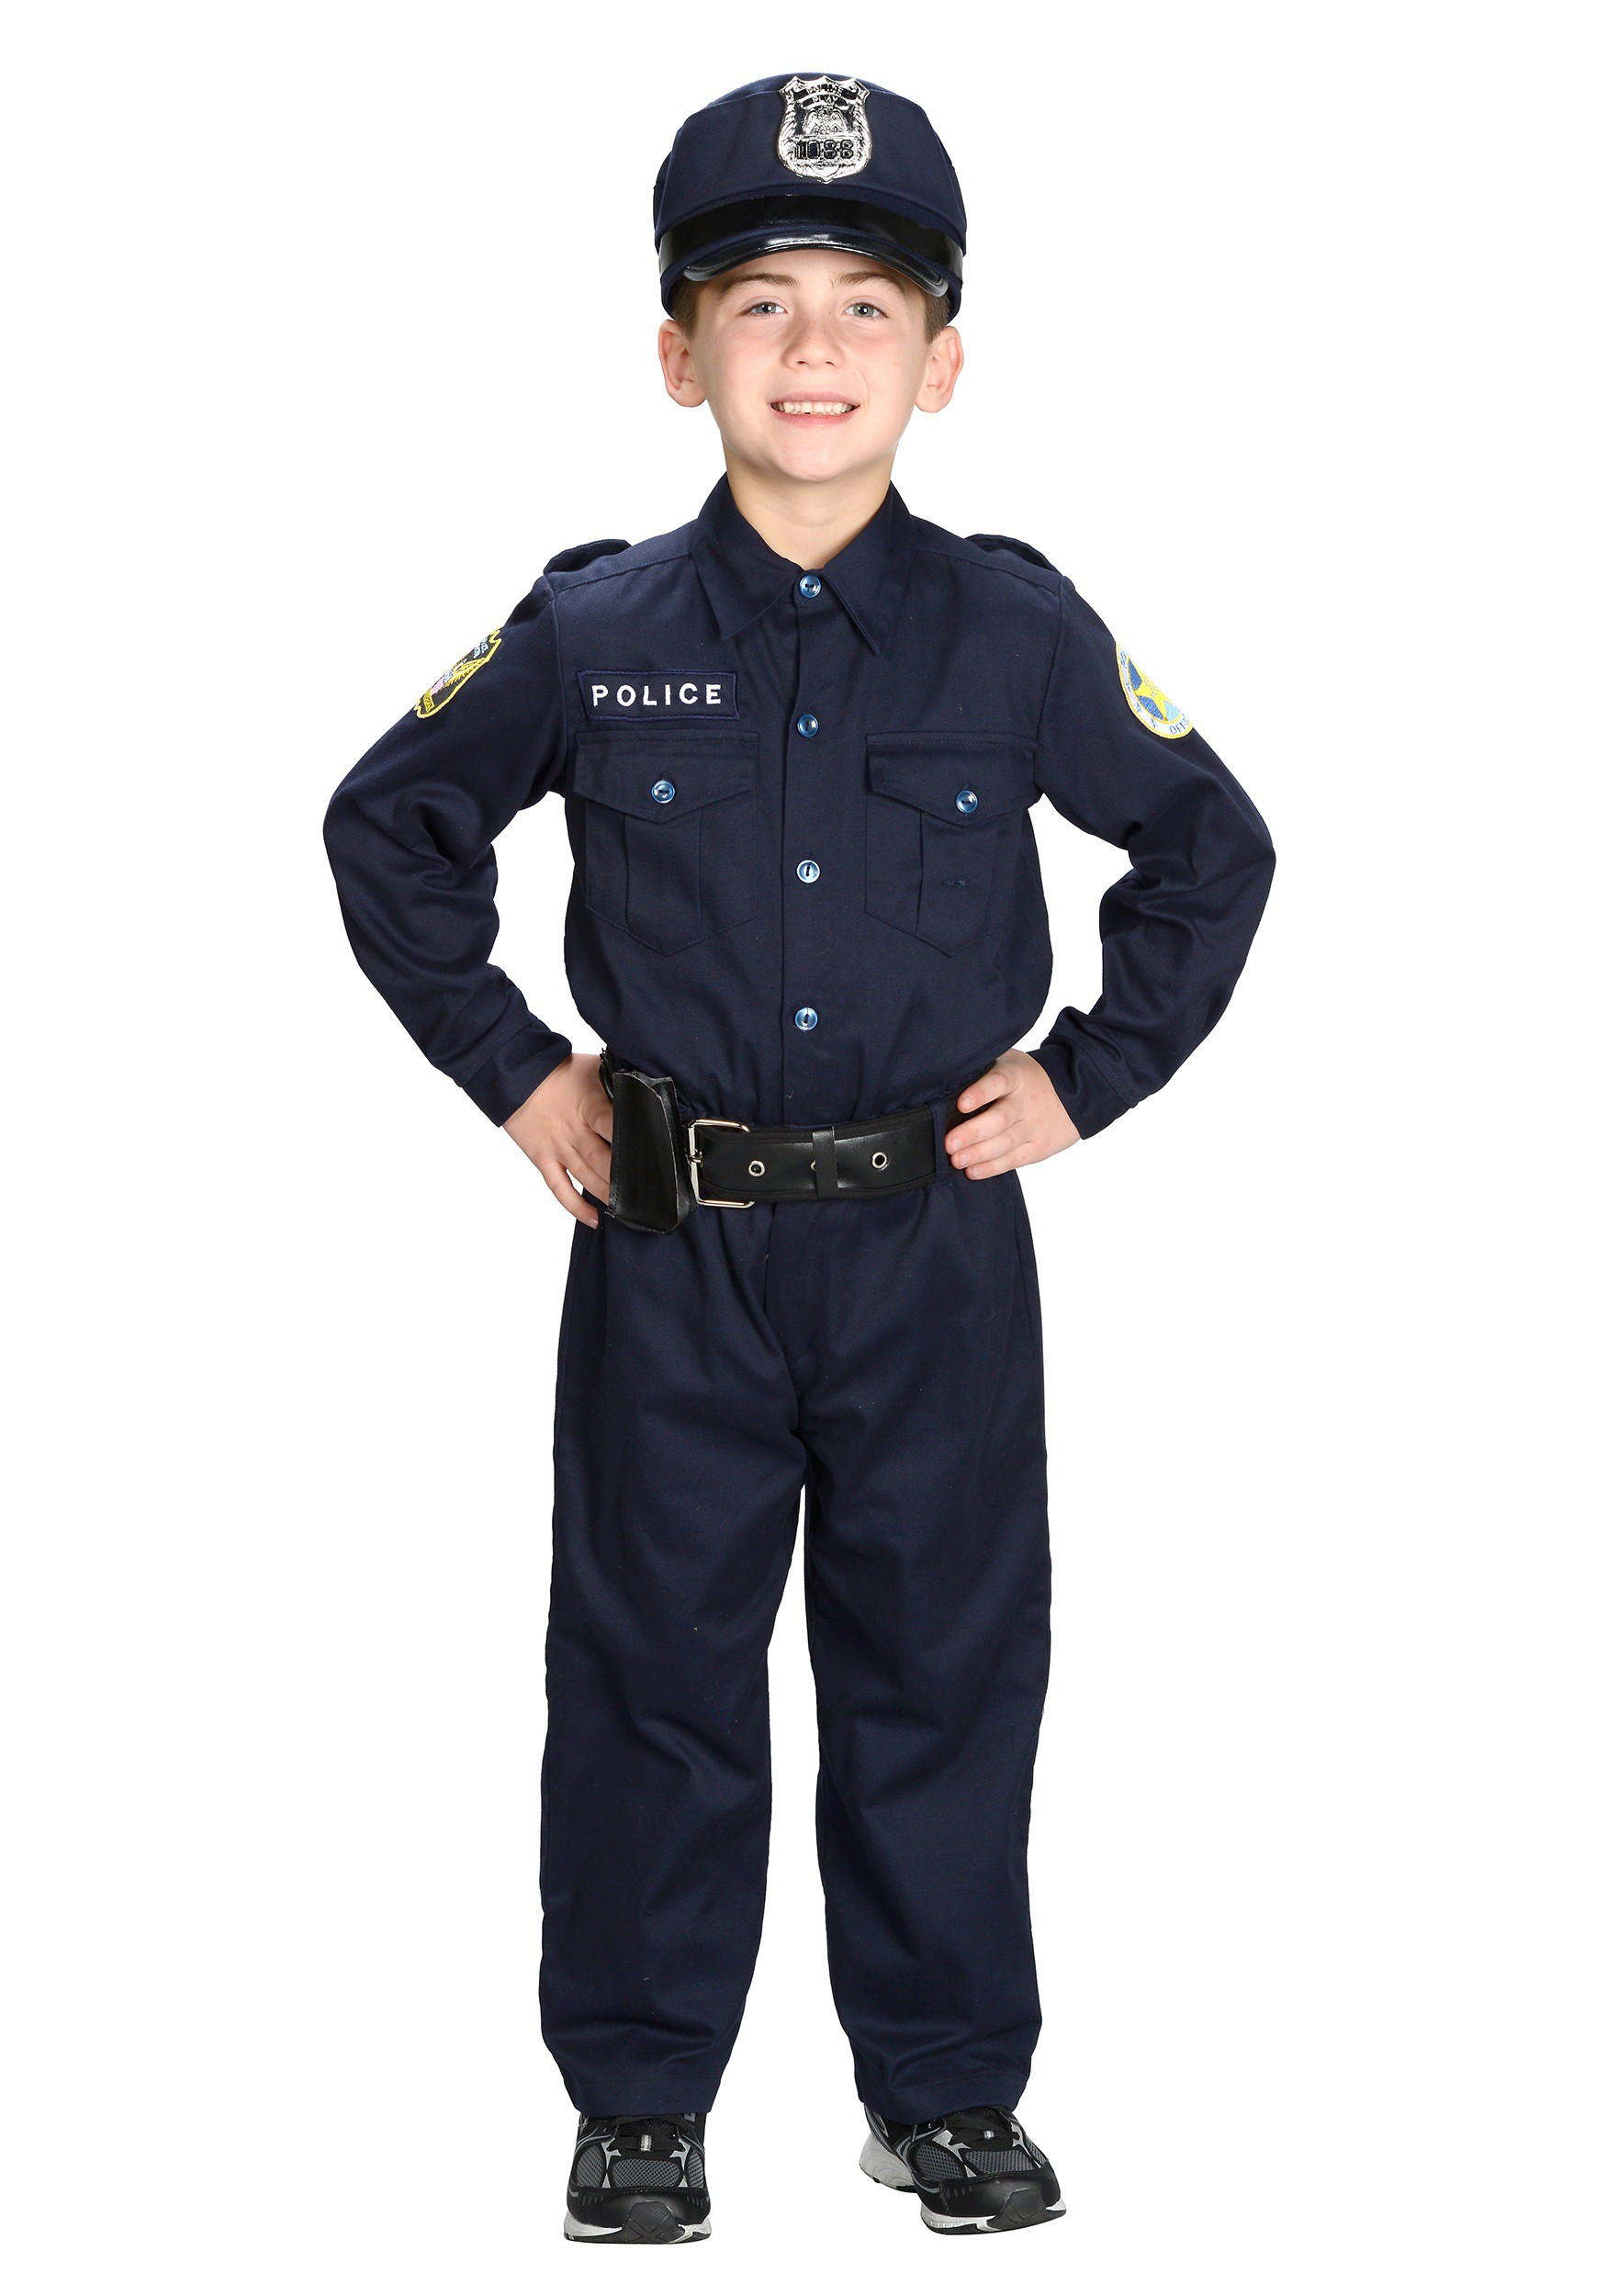 Boys Deluxe Police Officer Costume For Child